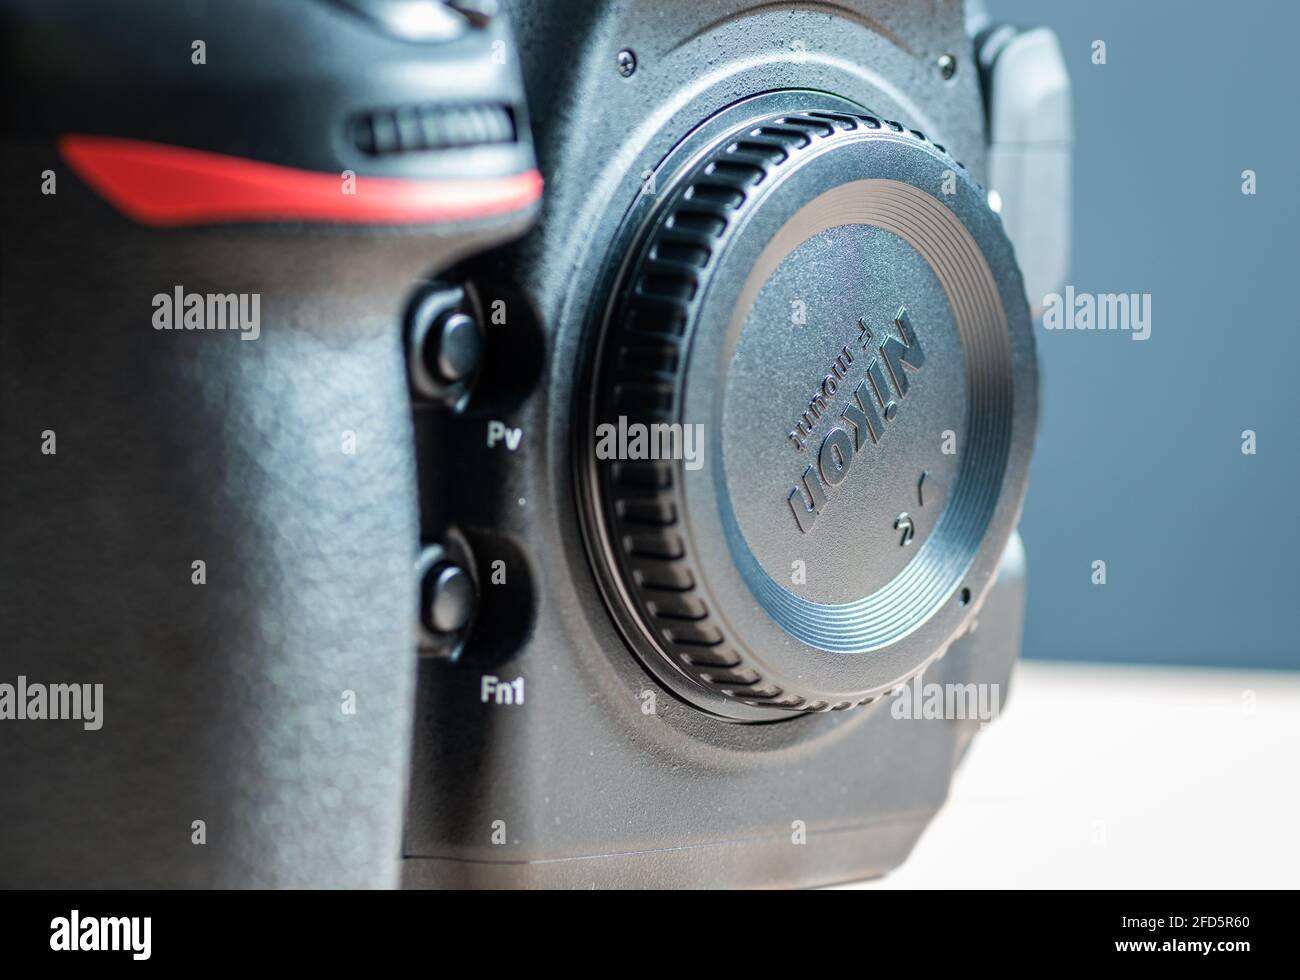 Galle, Sri Lanka - 02 17 2021: Nikon DSLR body front view with body cap  attached into the lens mount. Nikon logo embossed into the body cap as a  backs Stock Photo - Alamy